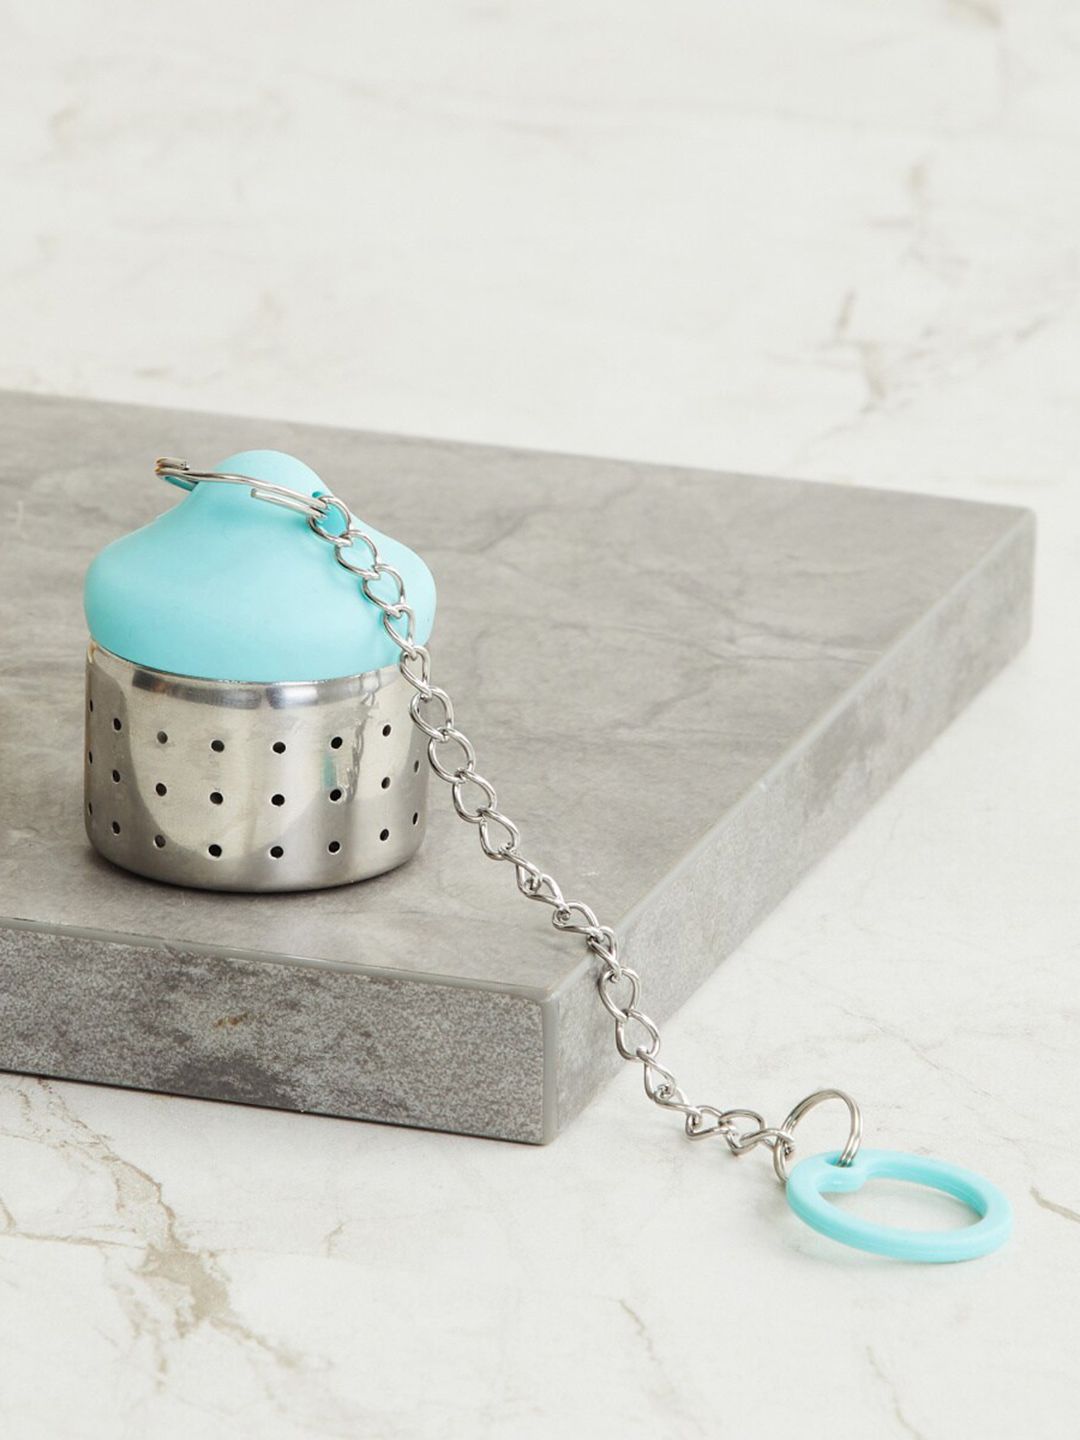 Home Centre Turquoise Blue Textured Stainless Steel Tea Strainer Price in India